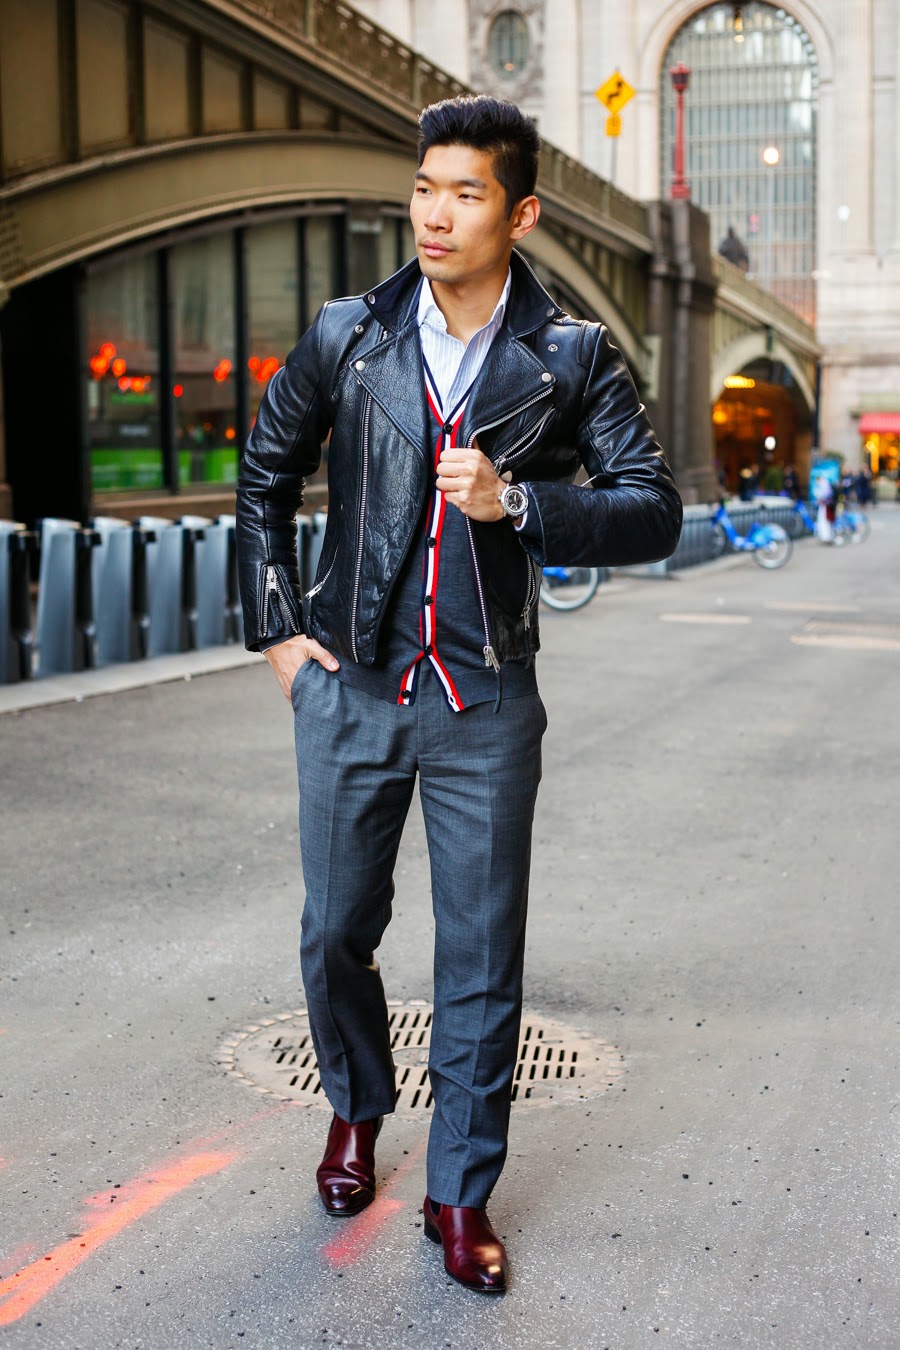 Levitate Style, Leo Chan - Ways to Wear a Leather Jacket to Work